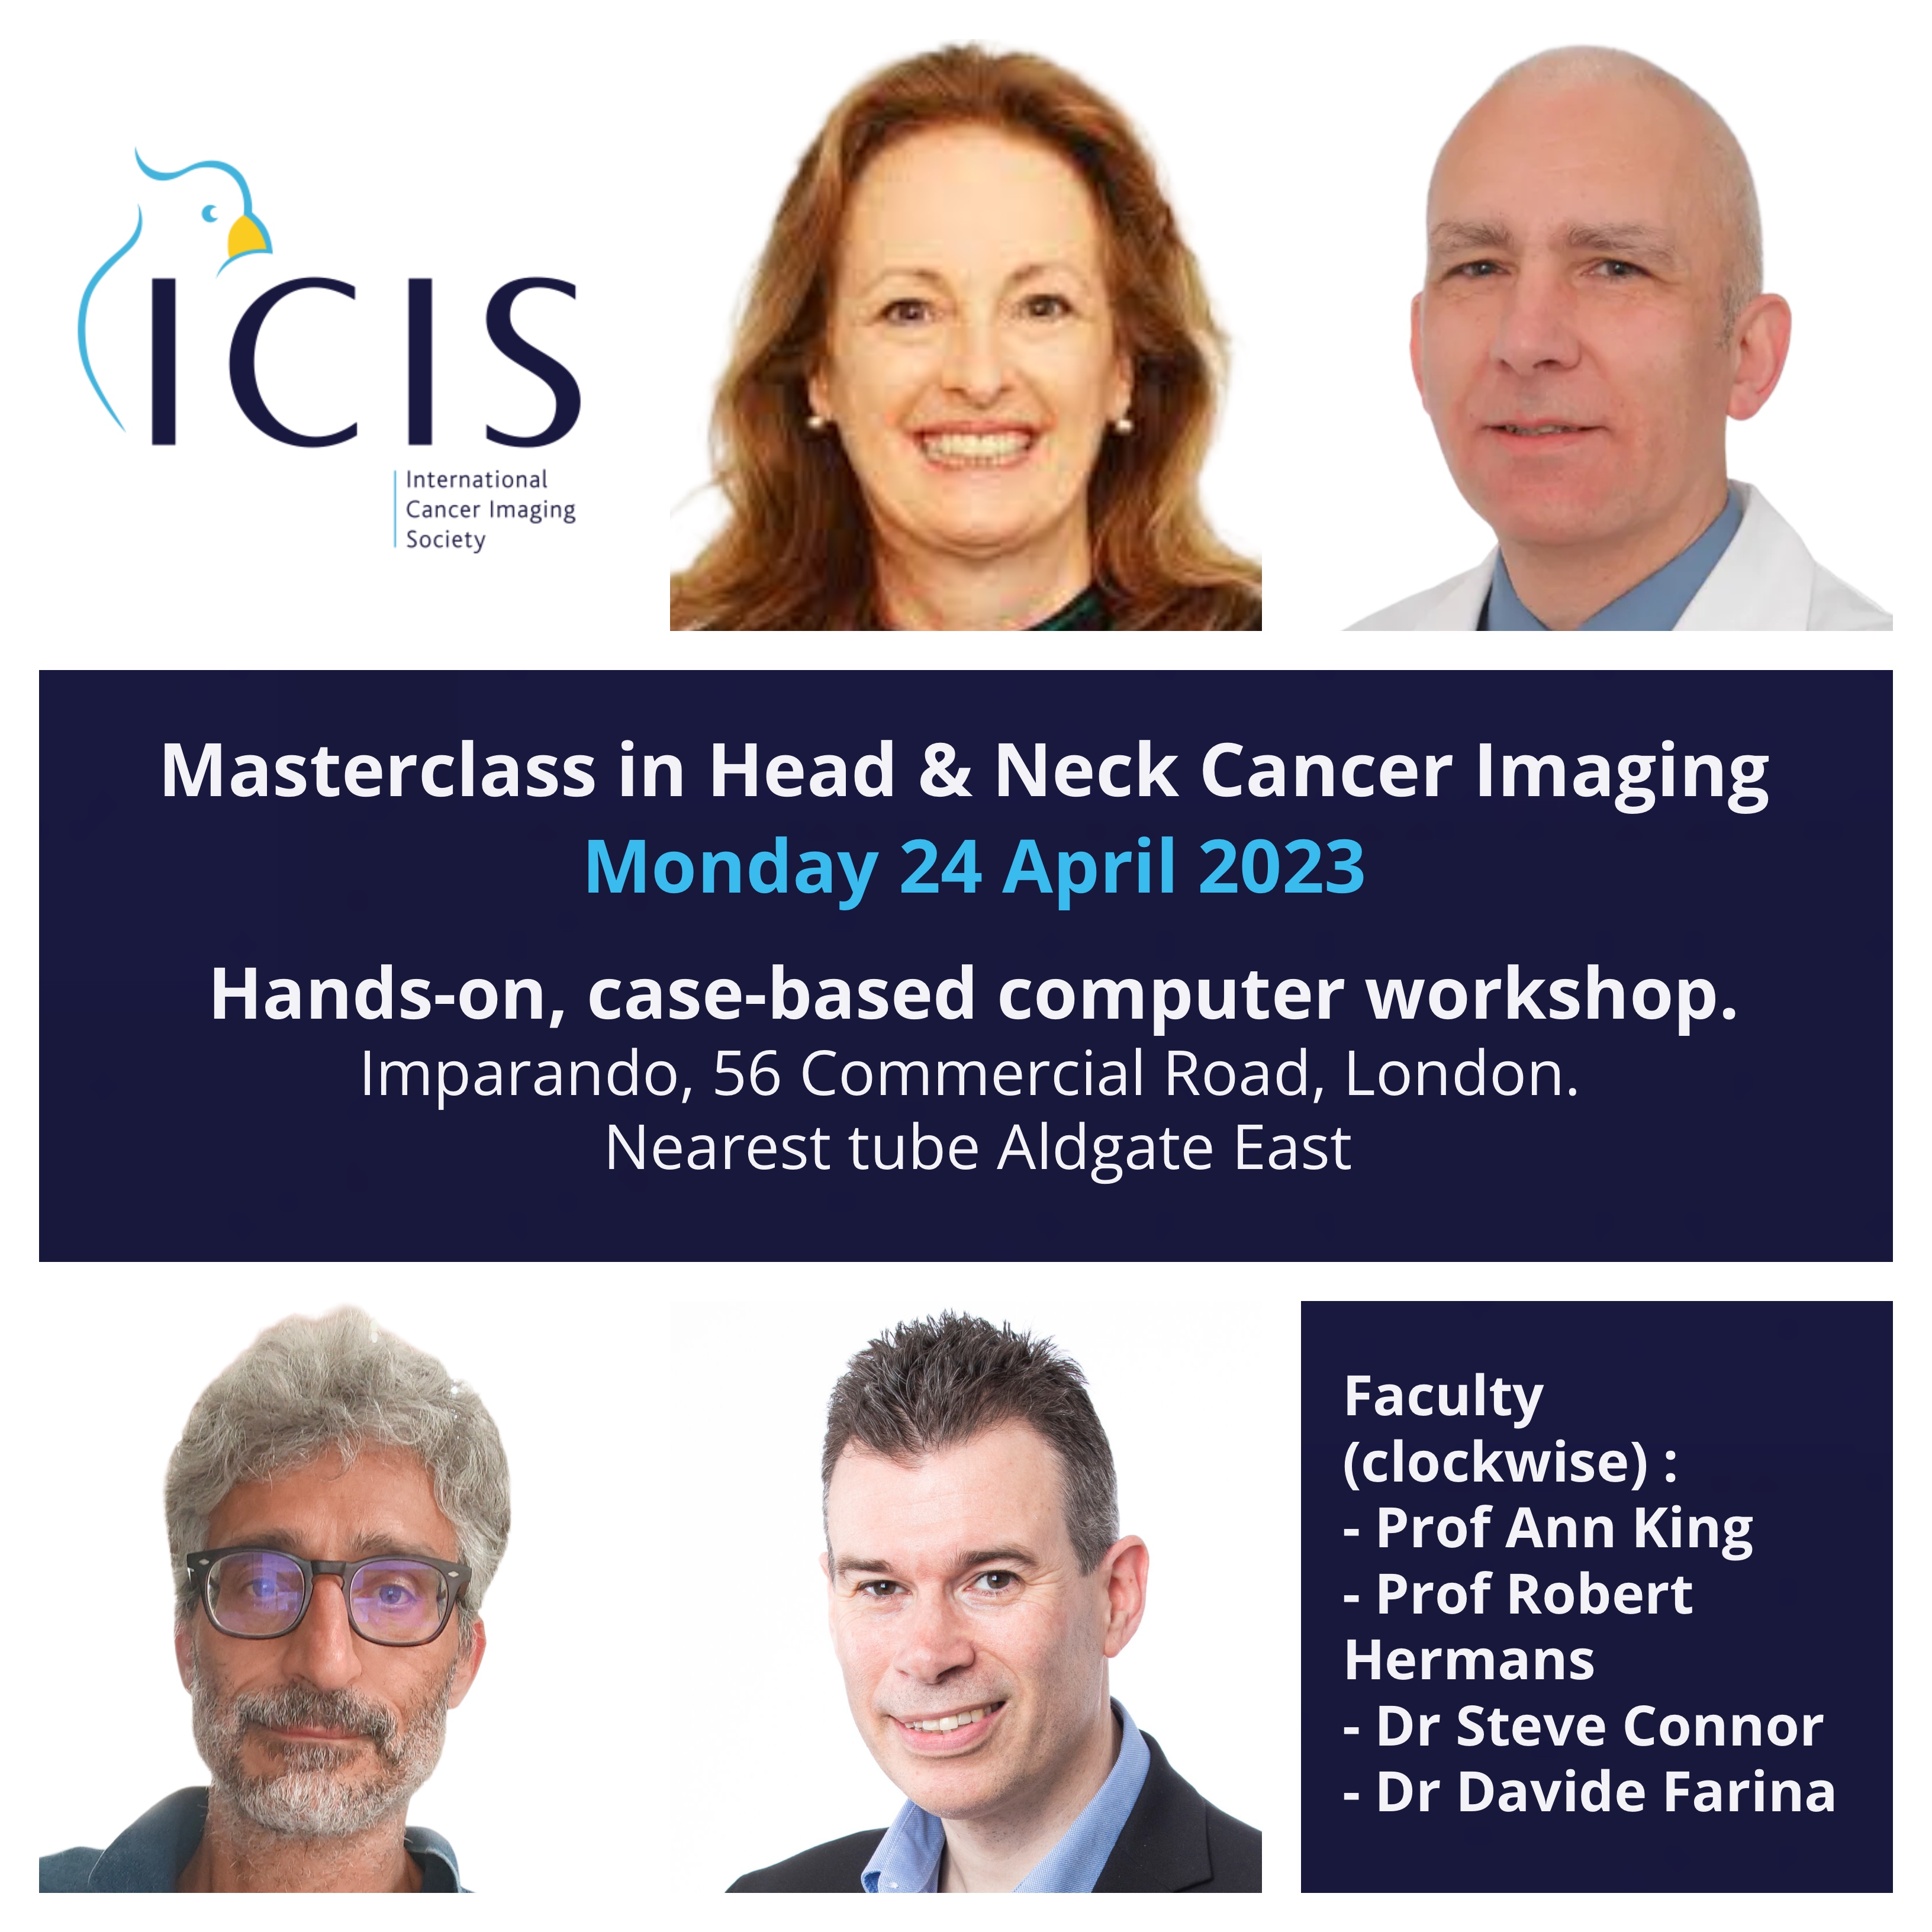 Masterclass in Head & Neck Cancer Imaging